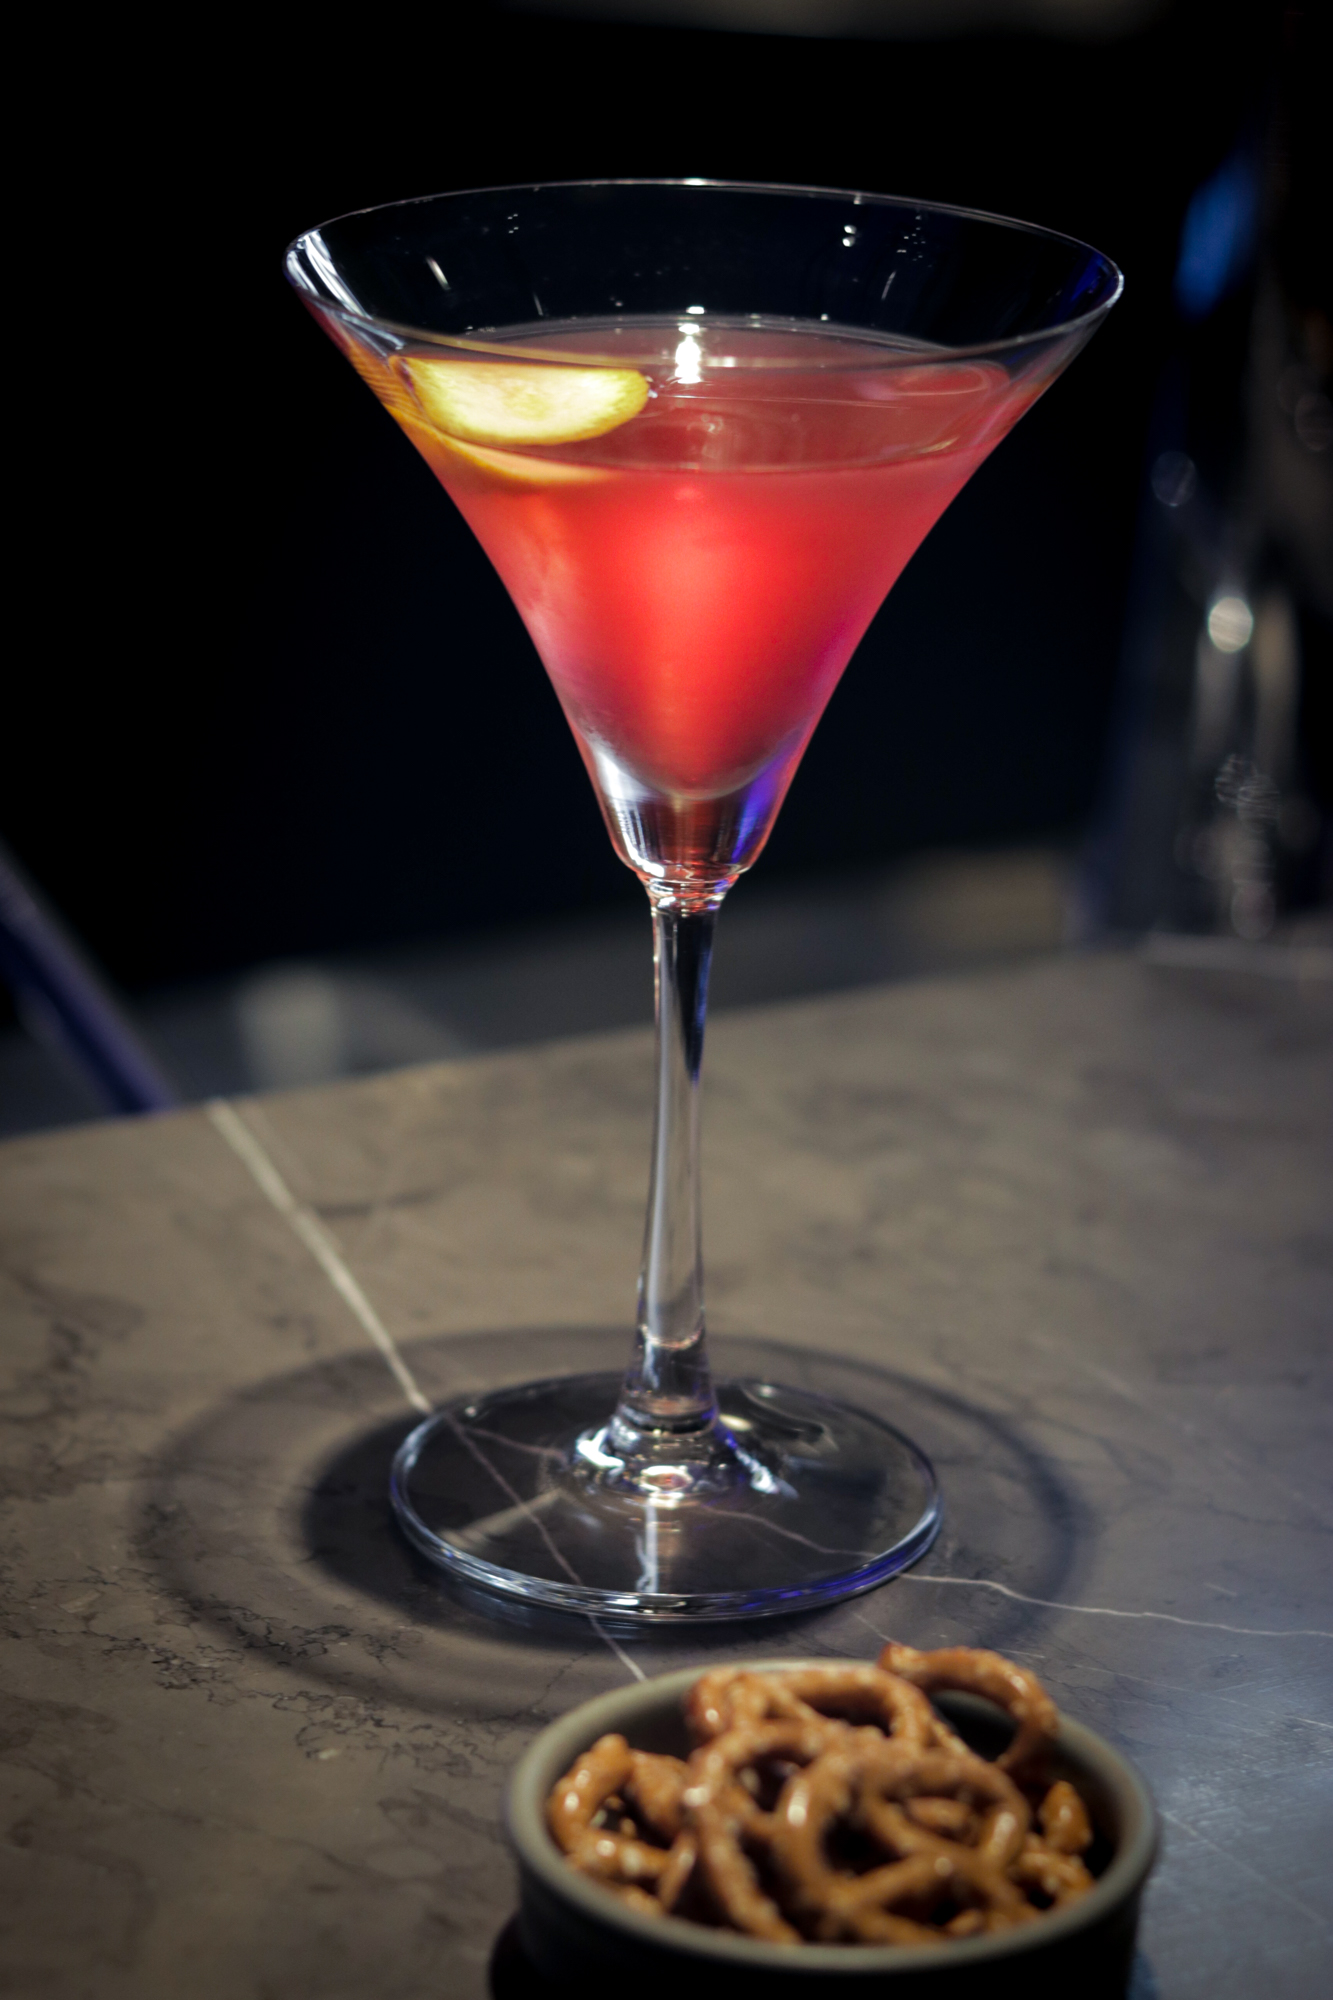 A jazzy and loud disco diva – introducing the Velvet cocktail